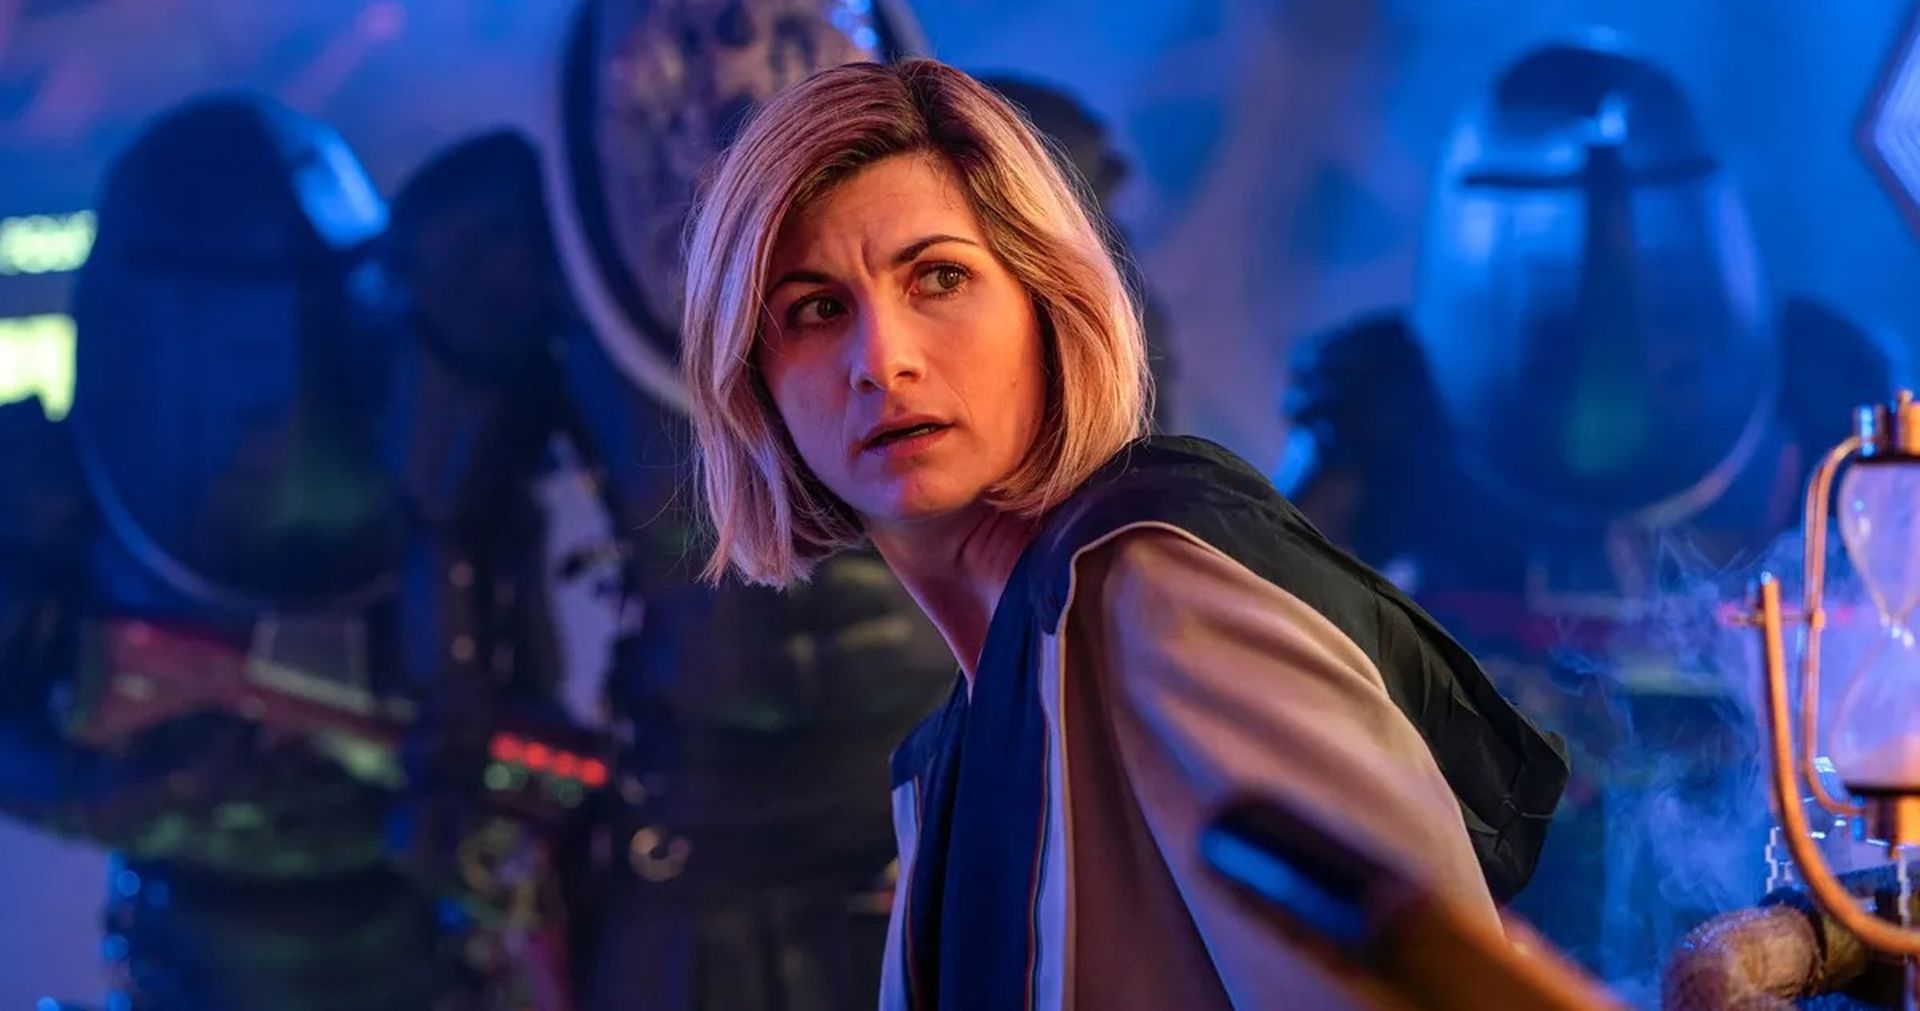 Ncuti Gatwa is the new Doctor Who, Jodie Whittaker will be leaving her role as the current Doctor and being replaced by Gatwa in 2023.